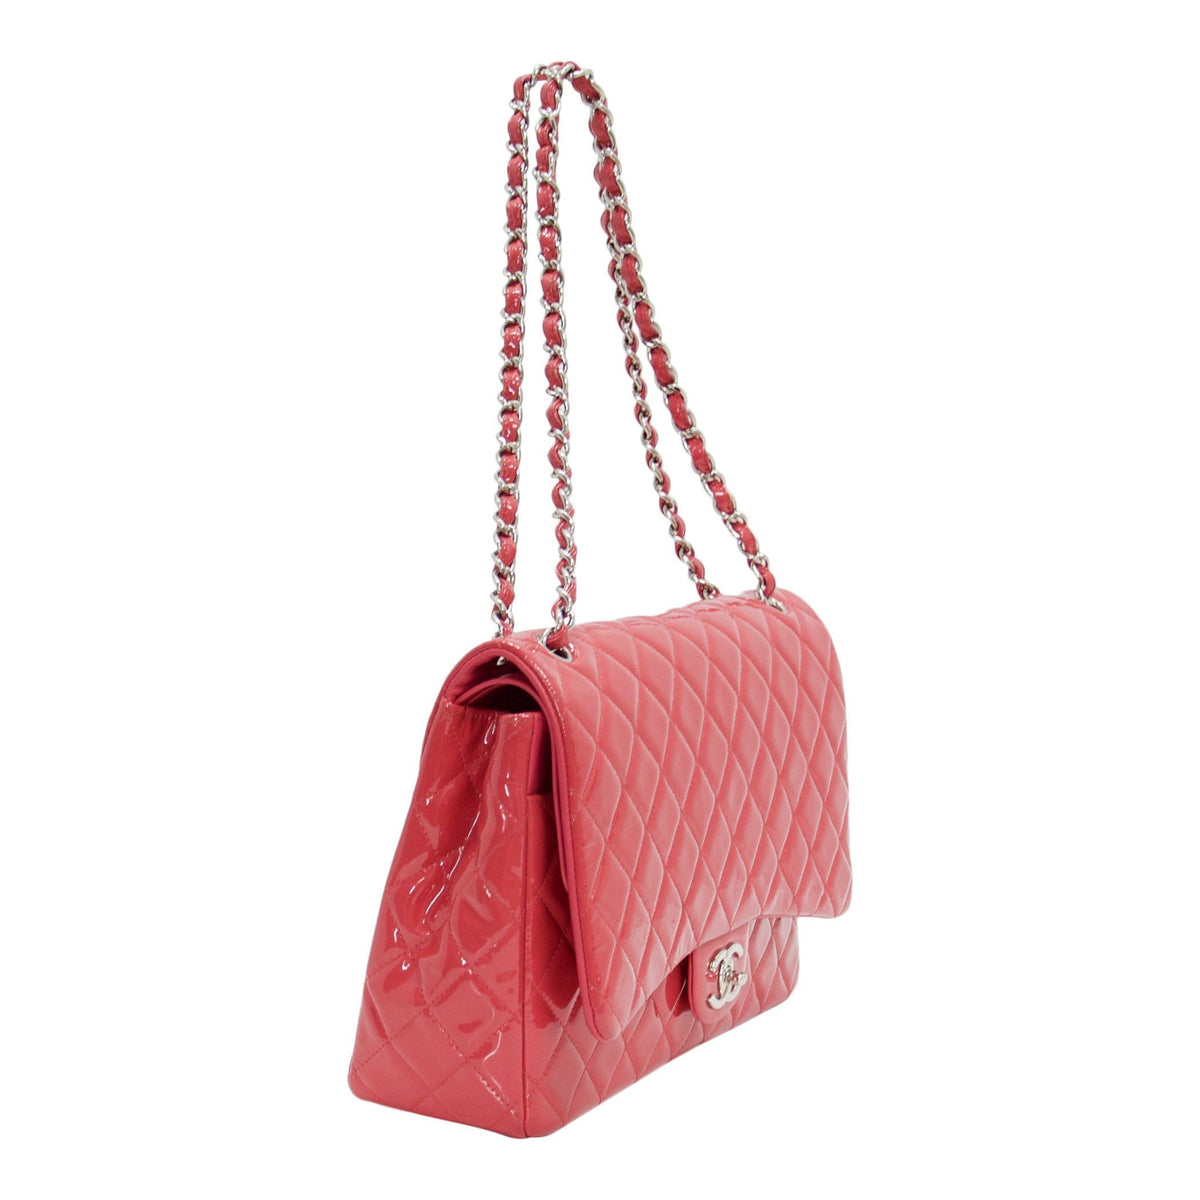 Shop Our Chanel Pink Patent Leather Classic Maxi Double Flap Bag Chanel to  Get the Real Deal